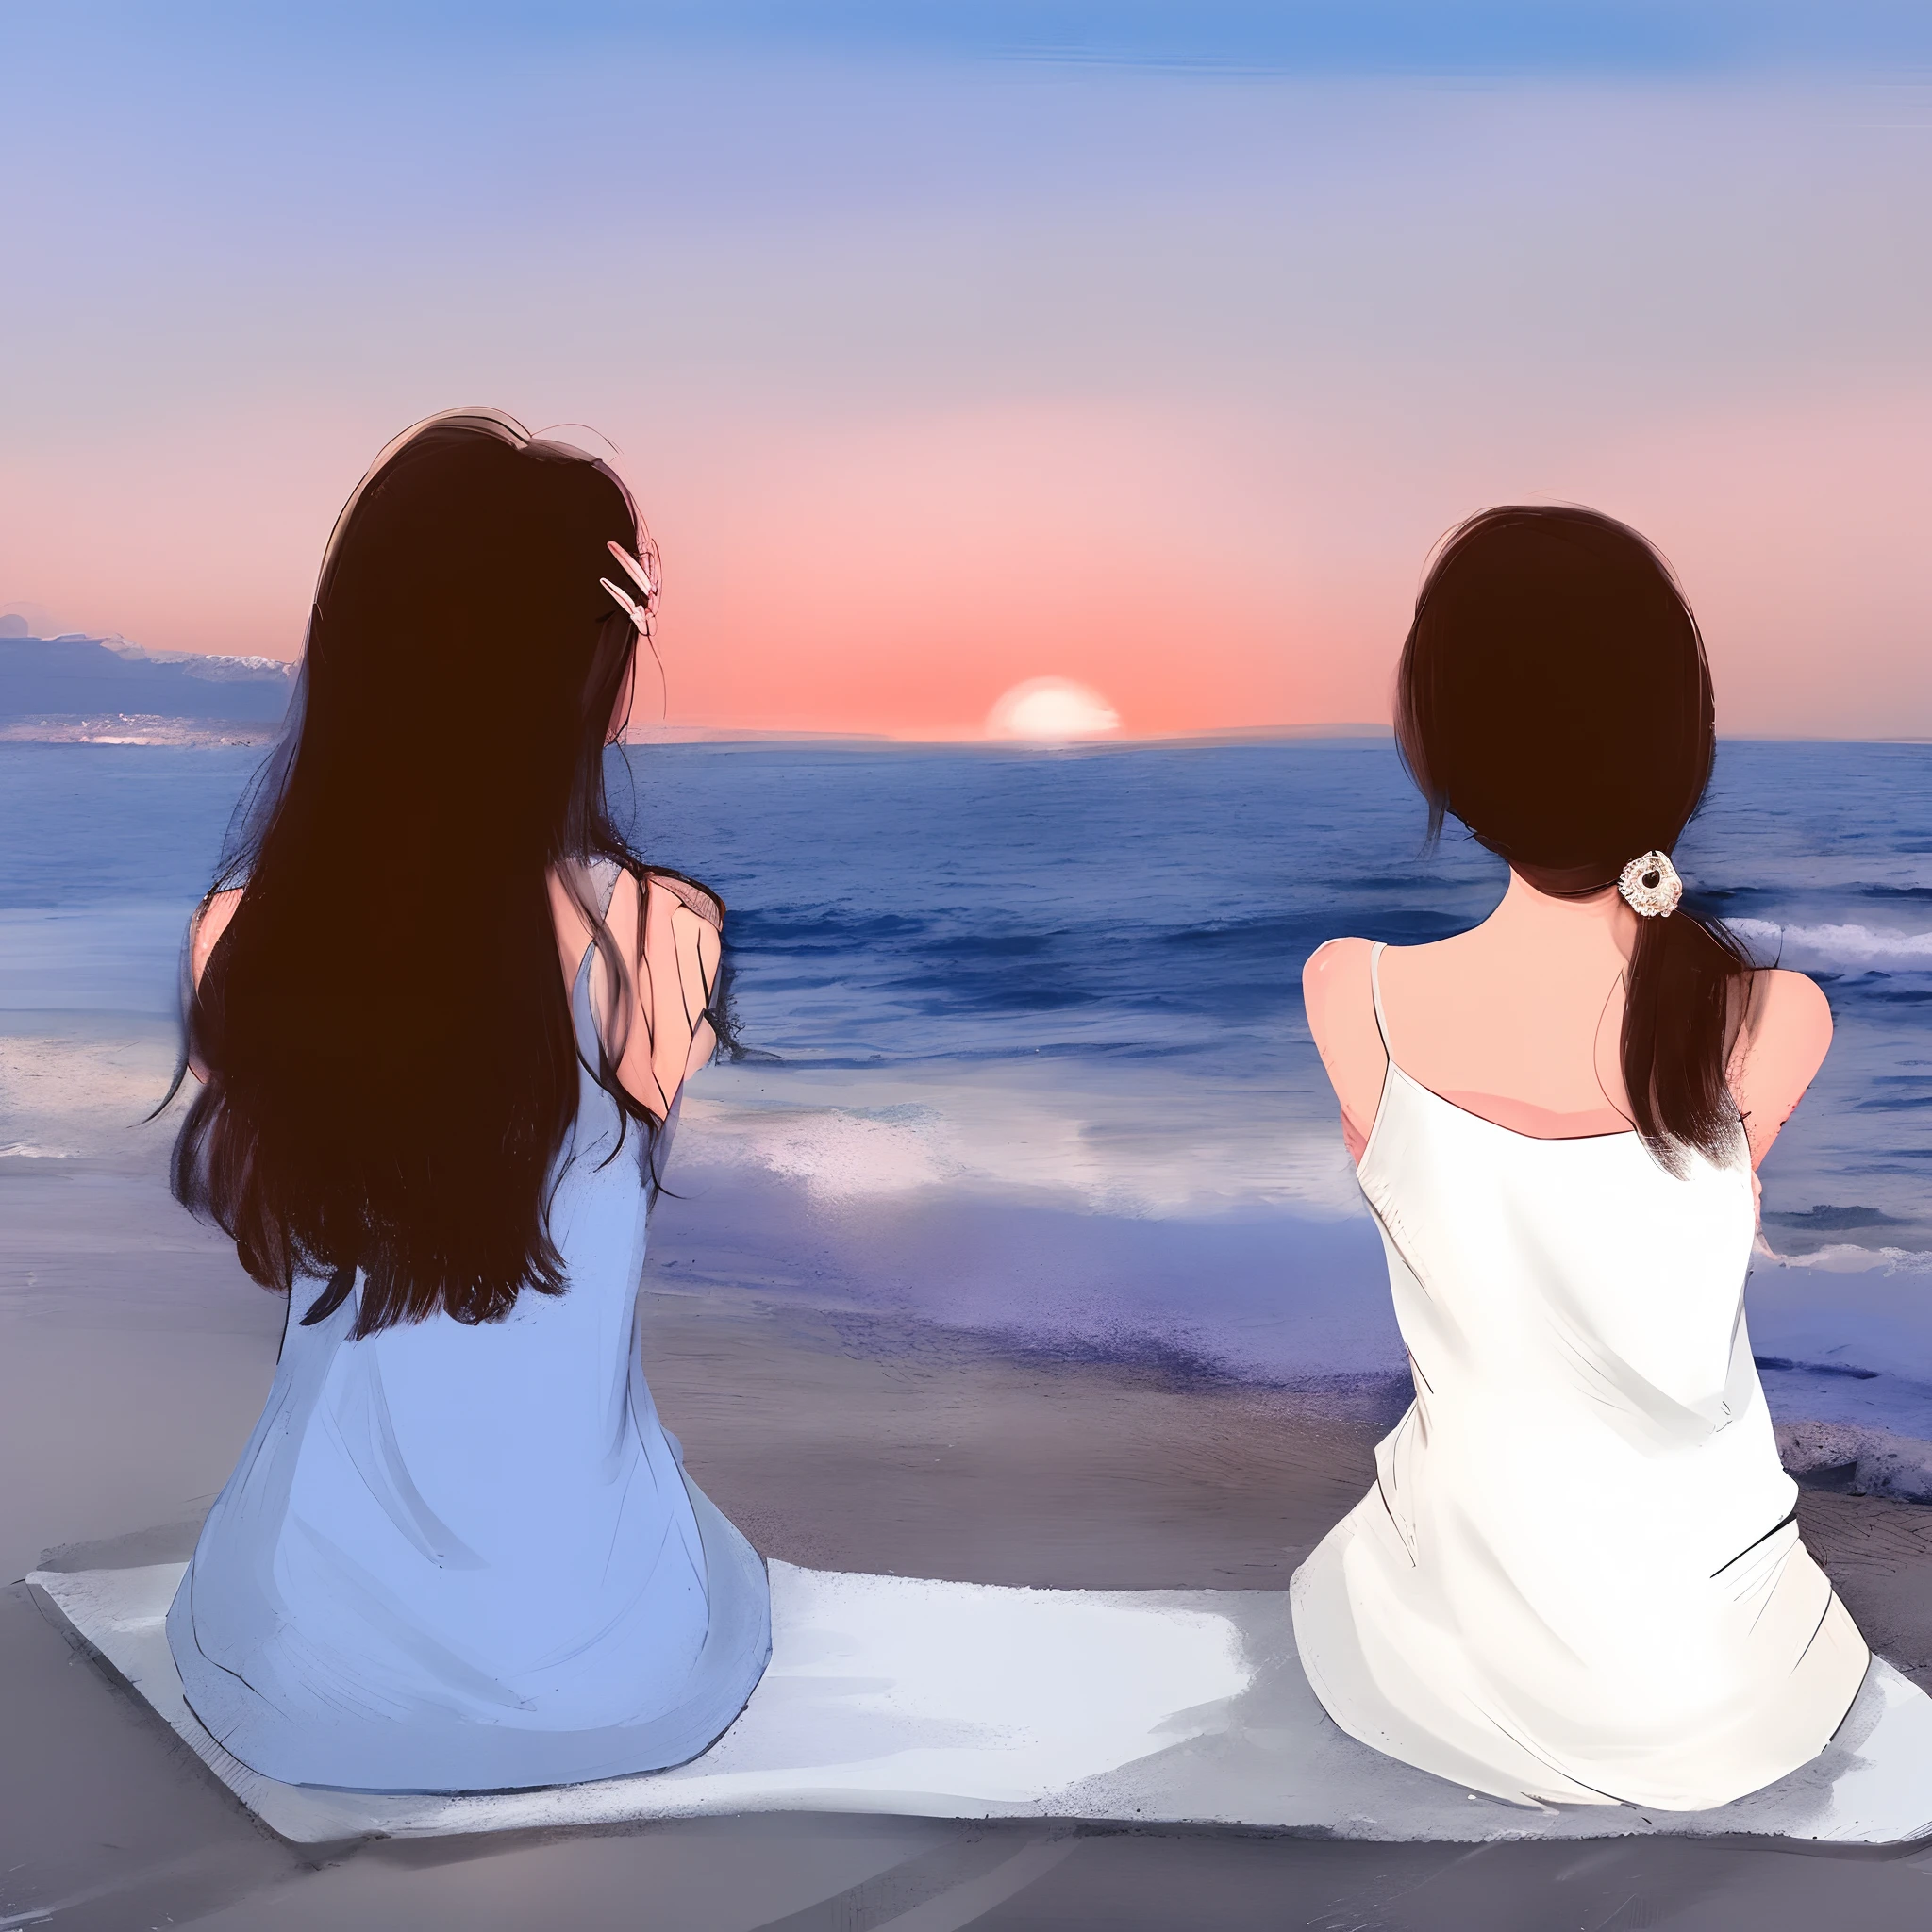 Two women sitting on the beach watching the sunset, beautiful painting of friends, With the setting sun, watching the sunset, Watching the sun set. japanese manga, at beach at sunset, at the beach on a sunset, watching the sunset, With the setting sun, sitting in beach, twogirls, On the beach at sunset, digital art picture, on the beach during sunset